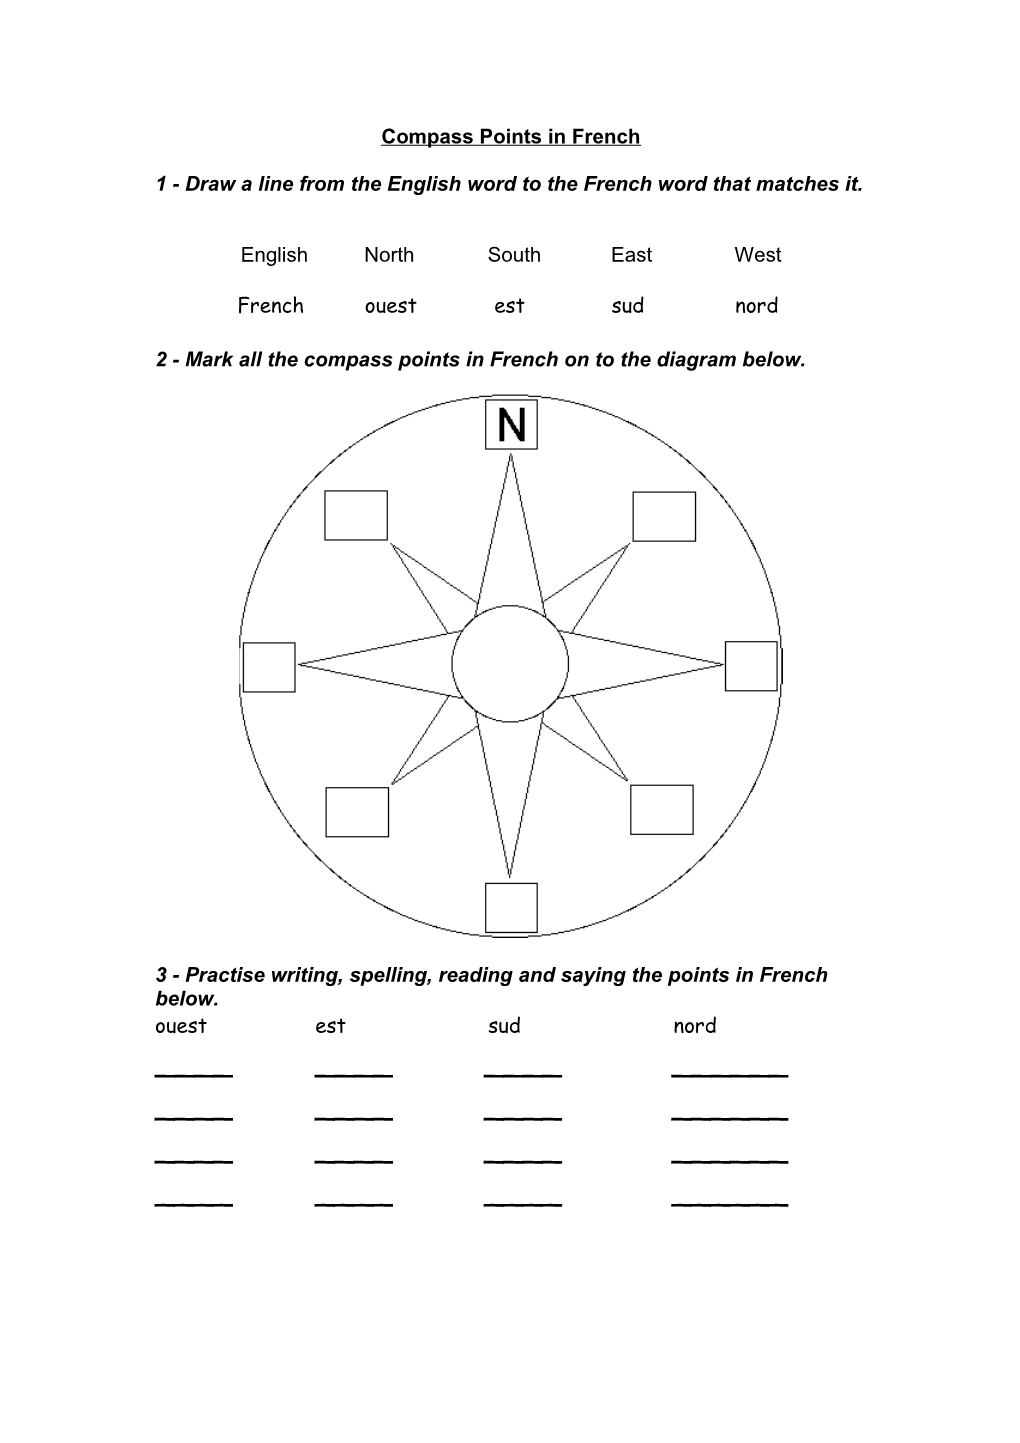 Compass Points in French